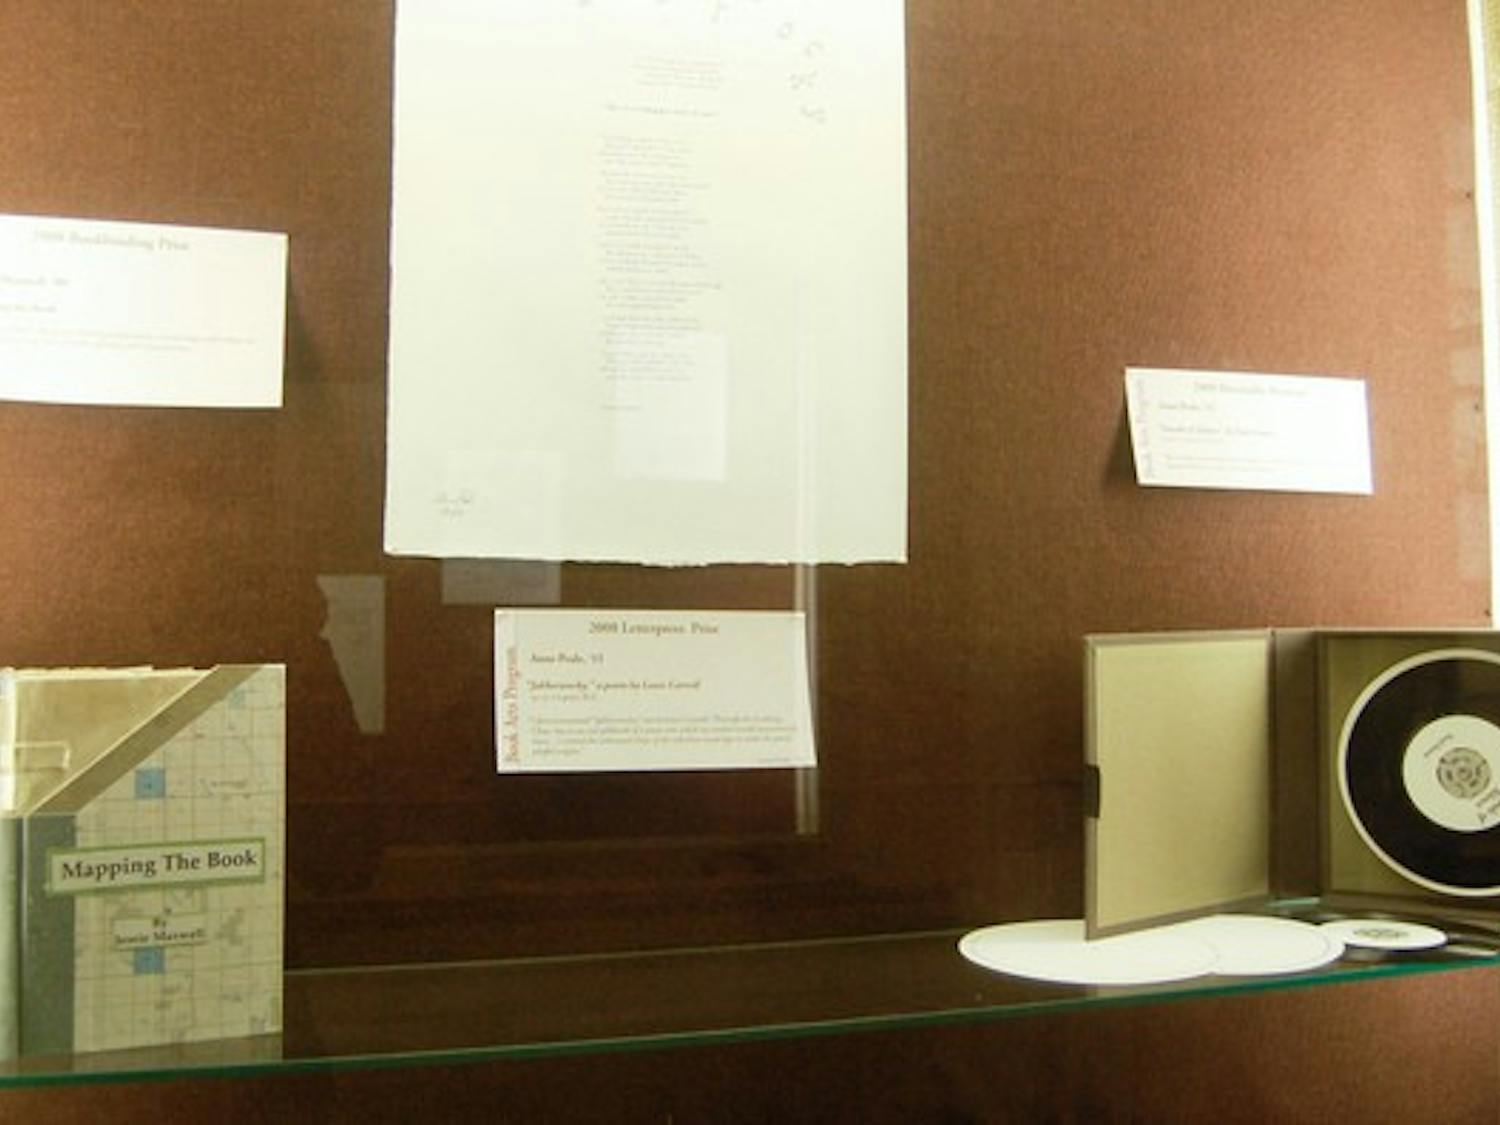 Student work from the book arts studios, located in the basement corridor between Baker and Sanborn Libraries, is on display in the main corridor of Baker Library.